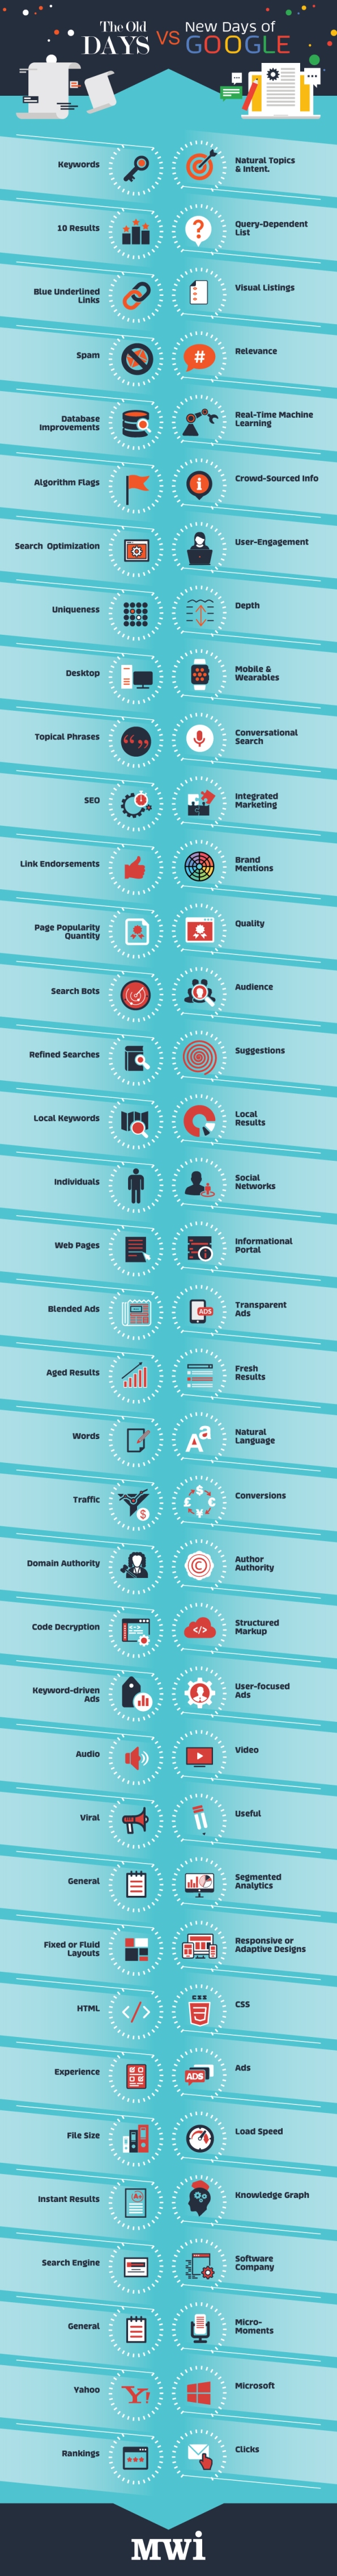 old vs new seo infographic